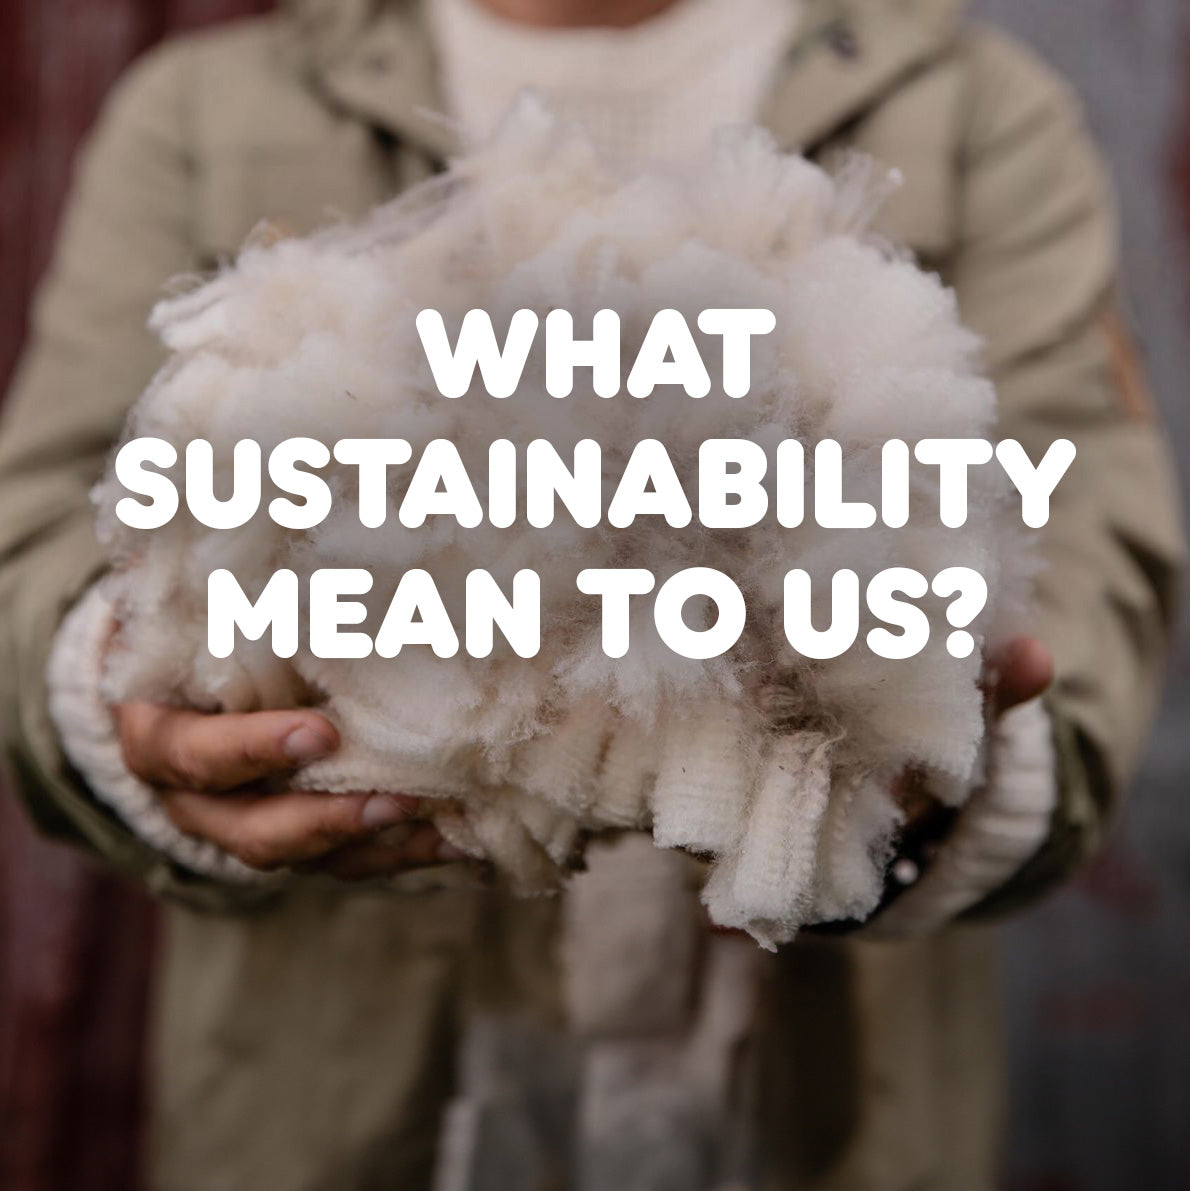 What sustainability mean to us?